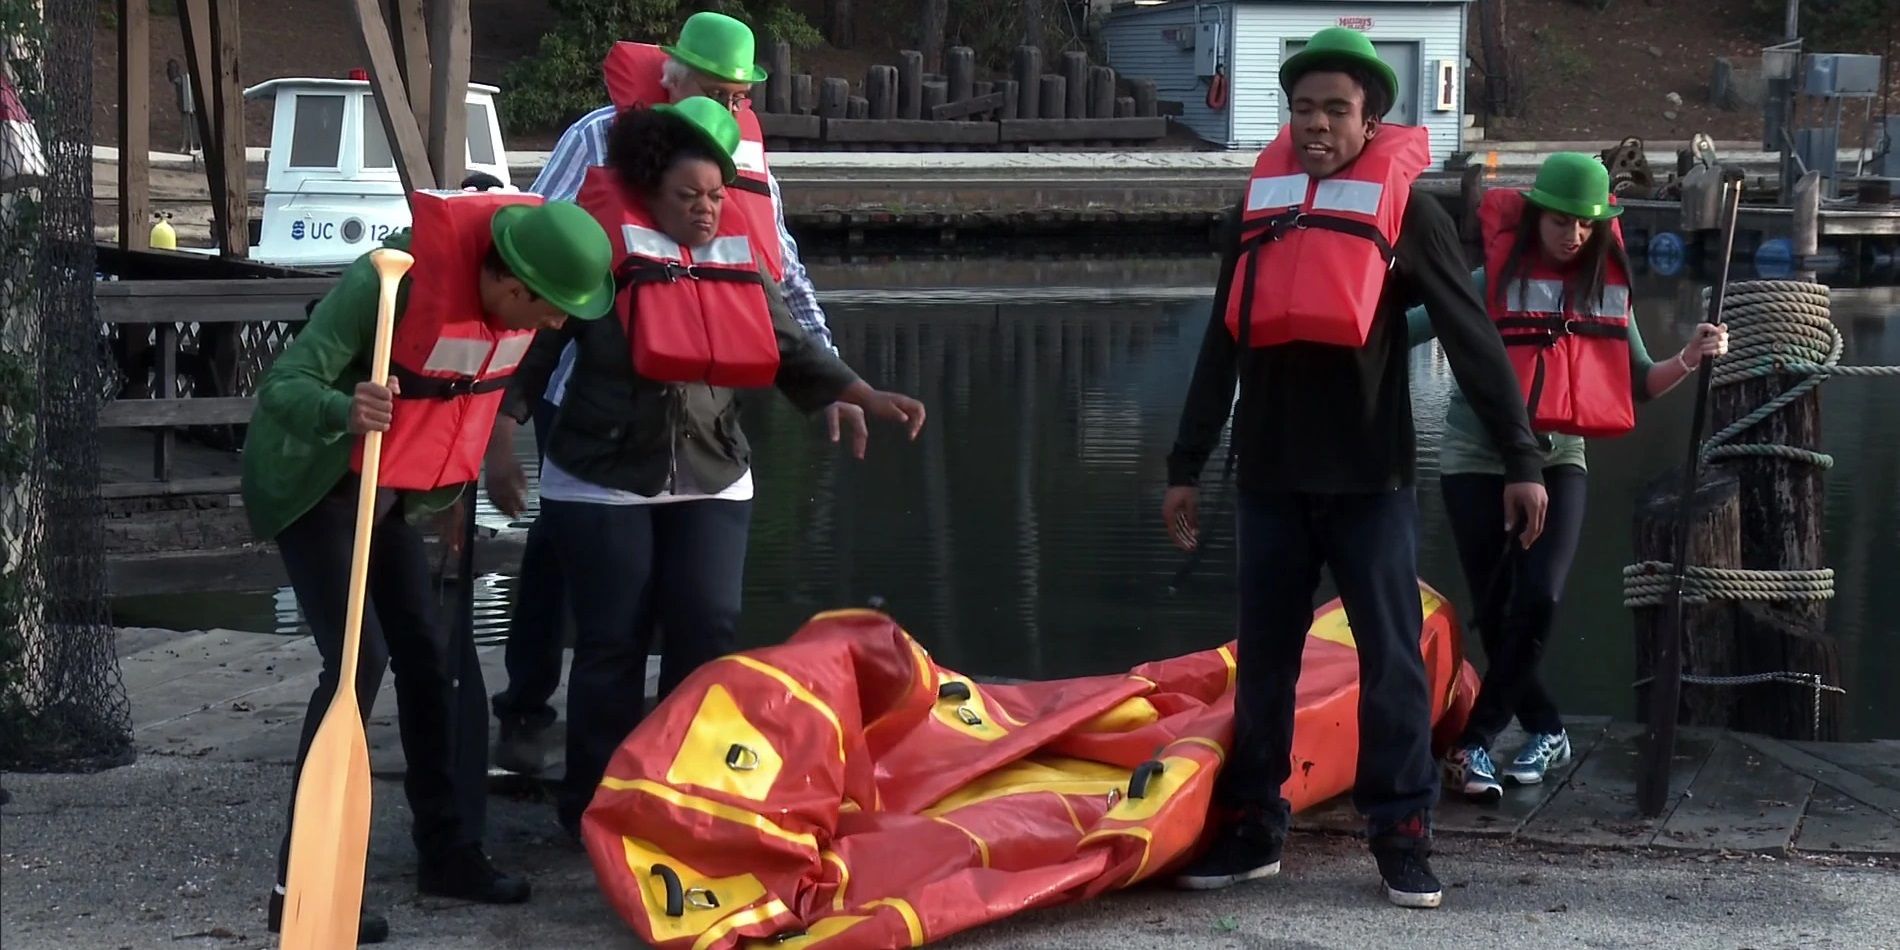 The cast wearing St.Patrick's day hats and life jackets